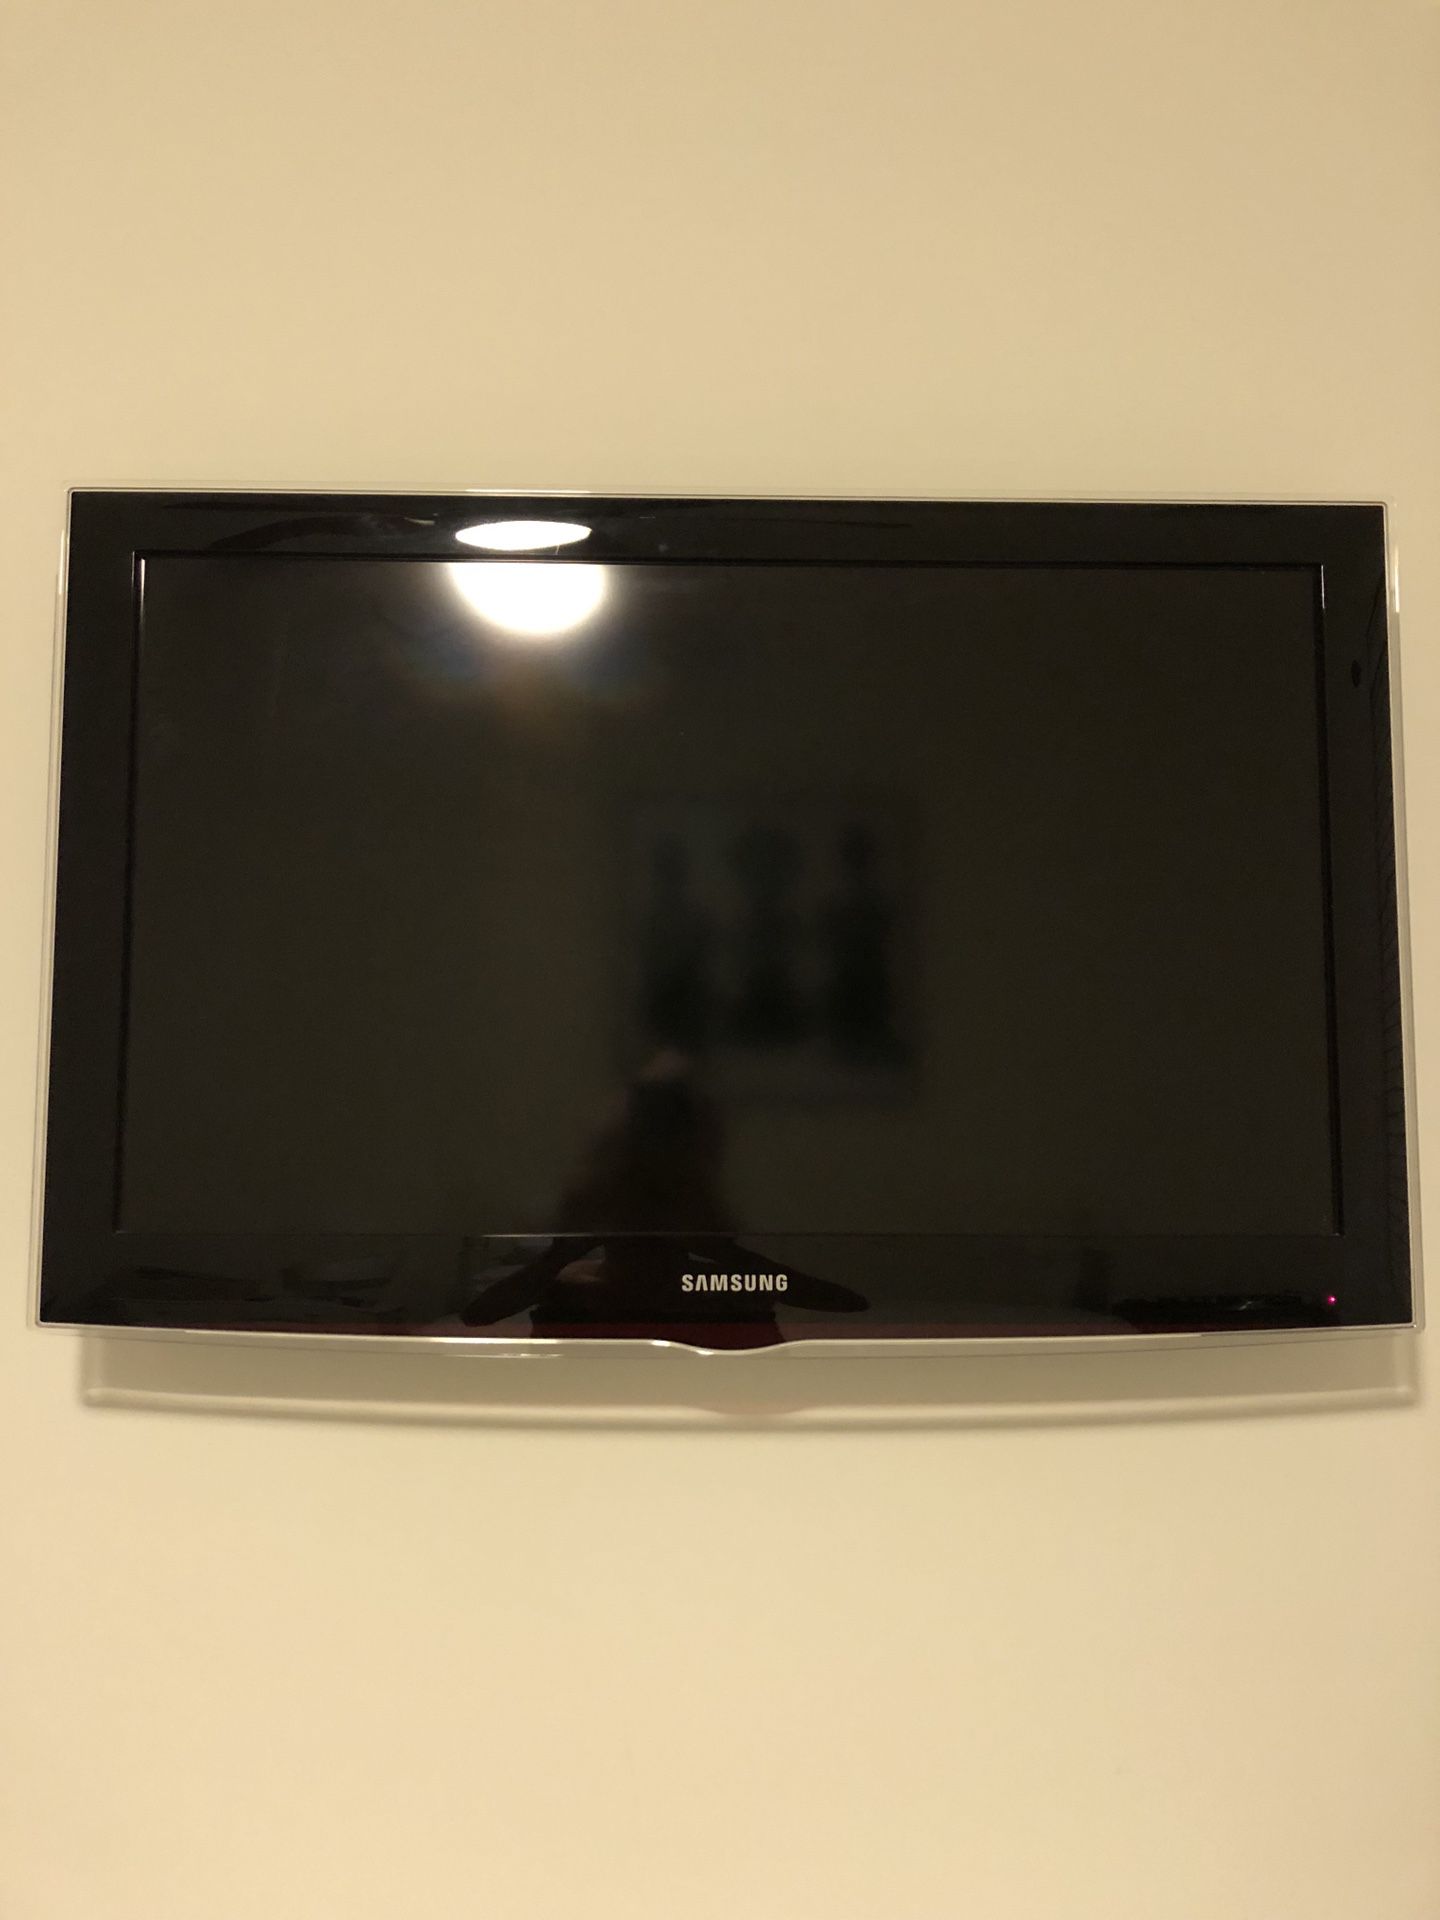 Samsung TV 32 Inches